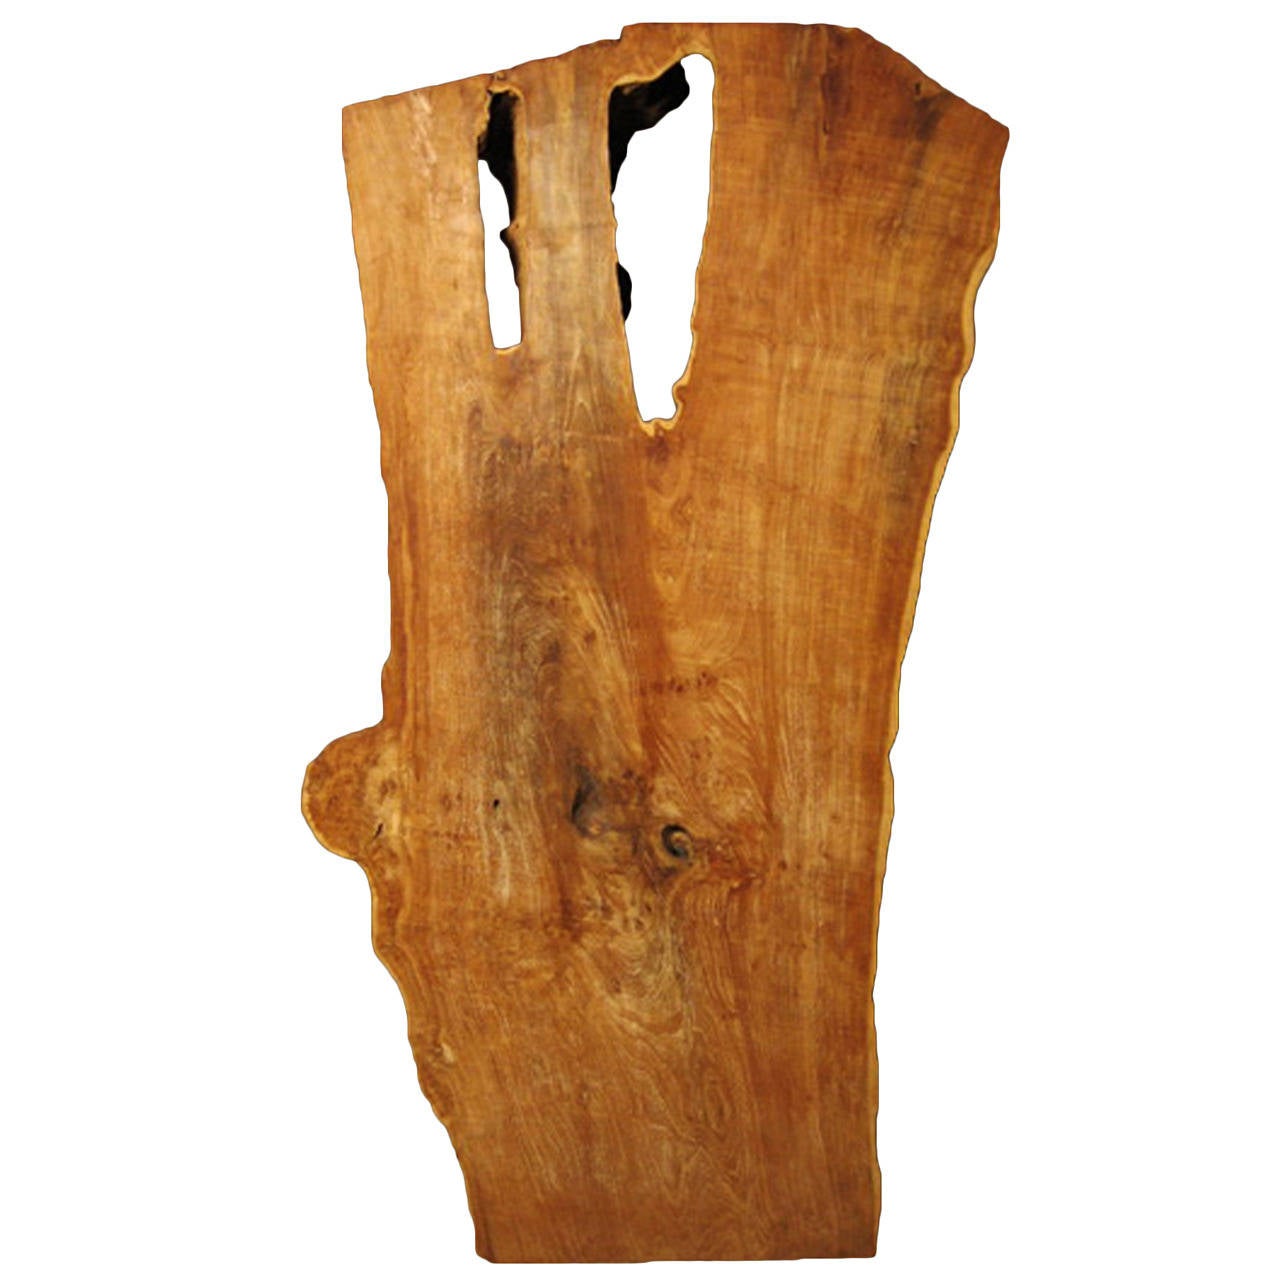 A remarkable piece of reclaimed teak showing the natural exterior surface and hand planed wood grain, from Indonesia